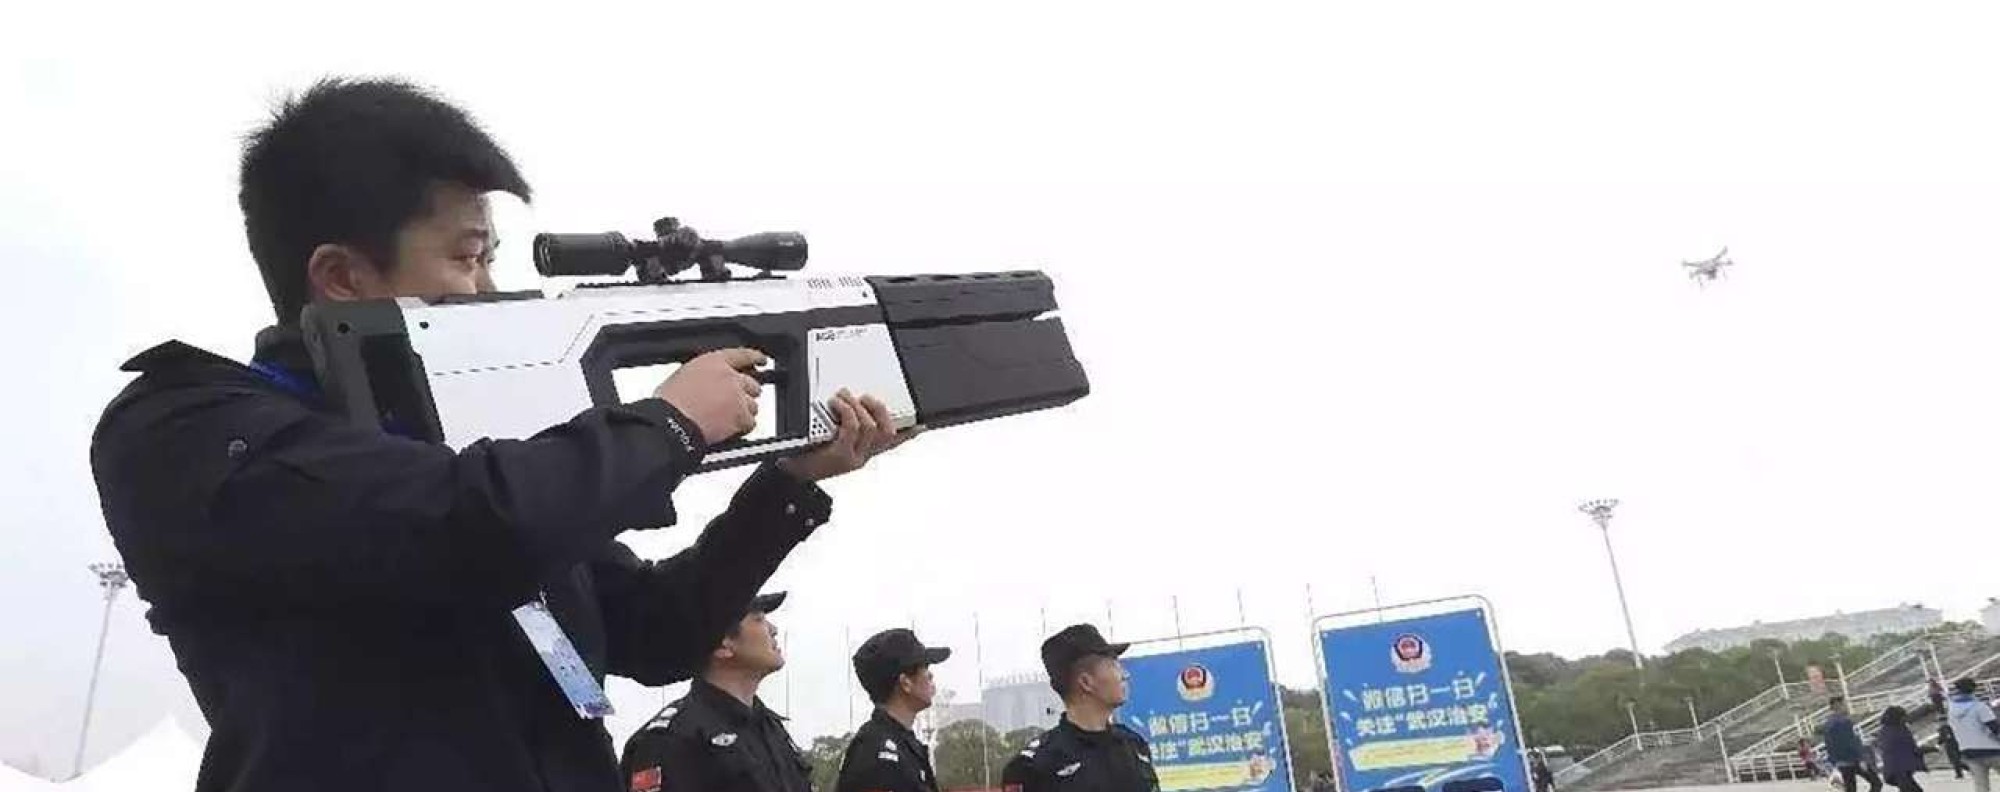 Chinese police armed with anti-drone 'guns' to scramble signals